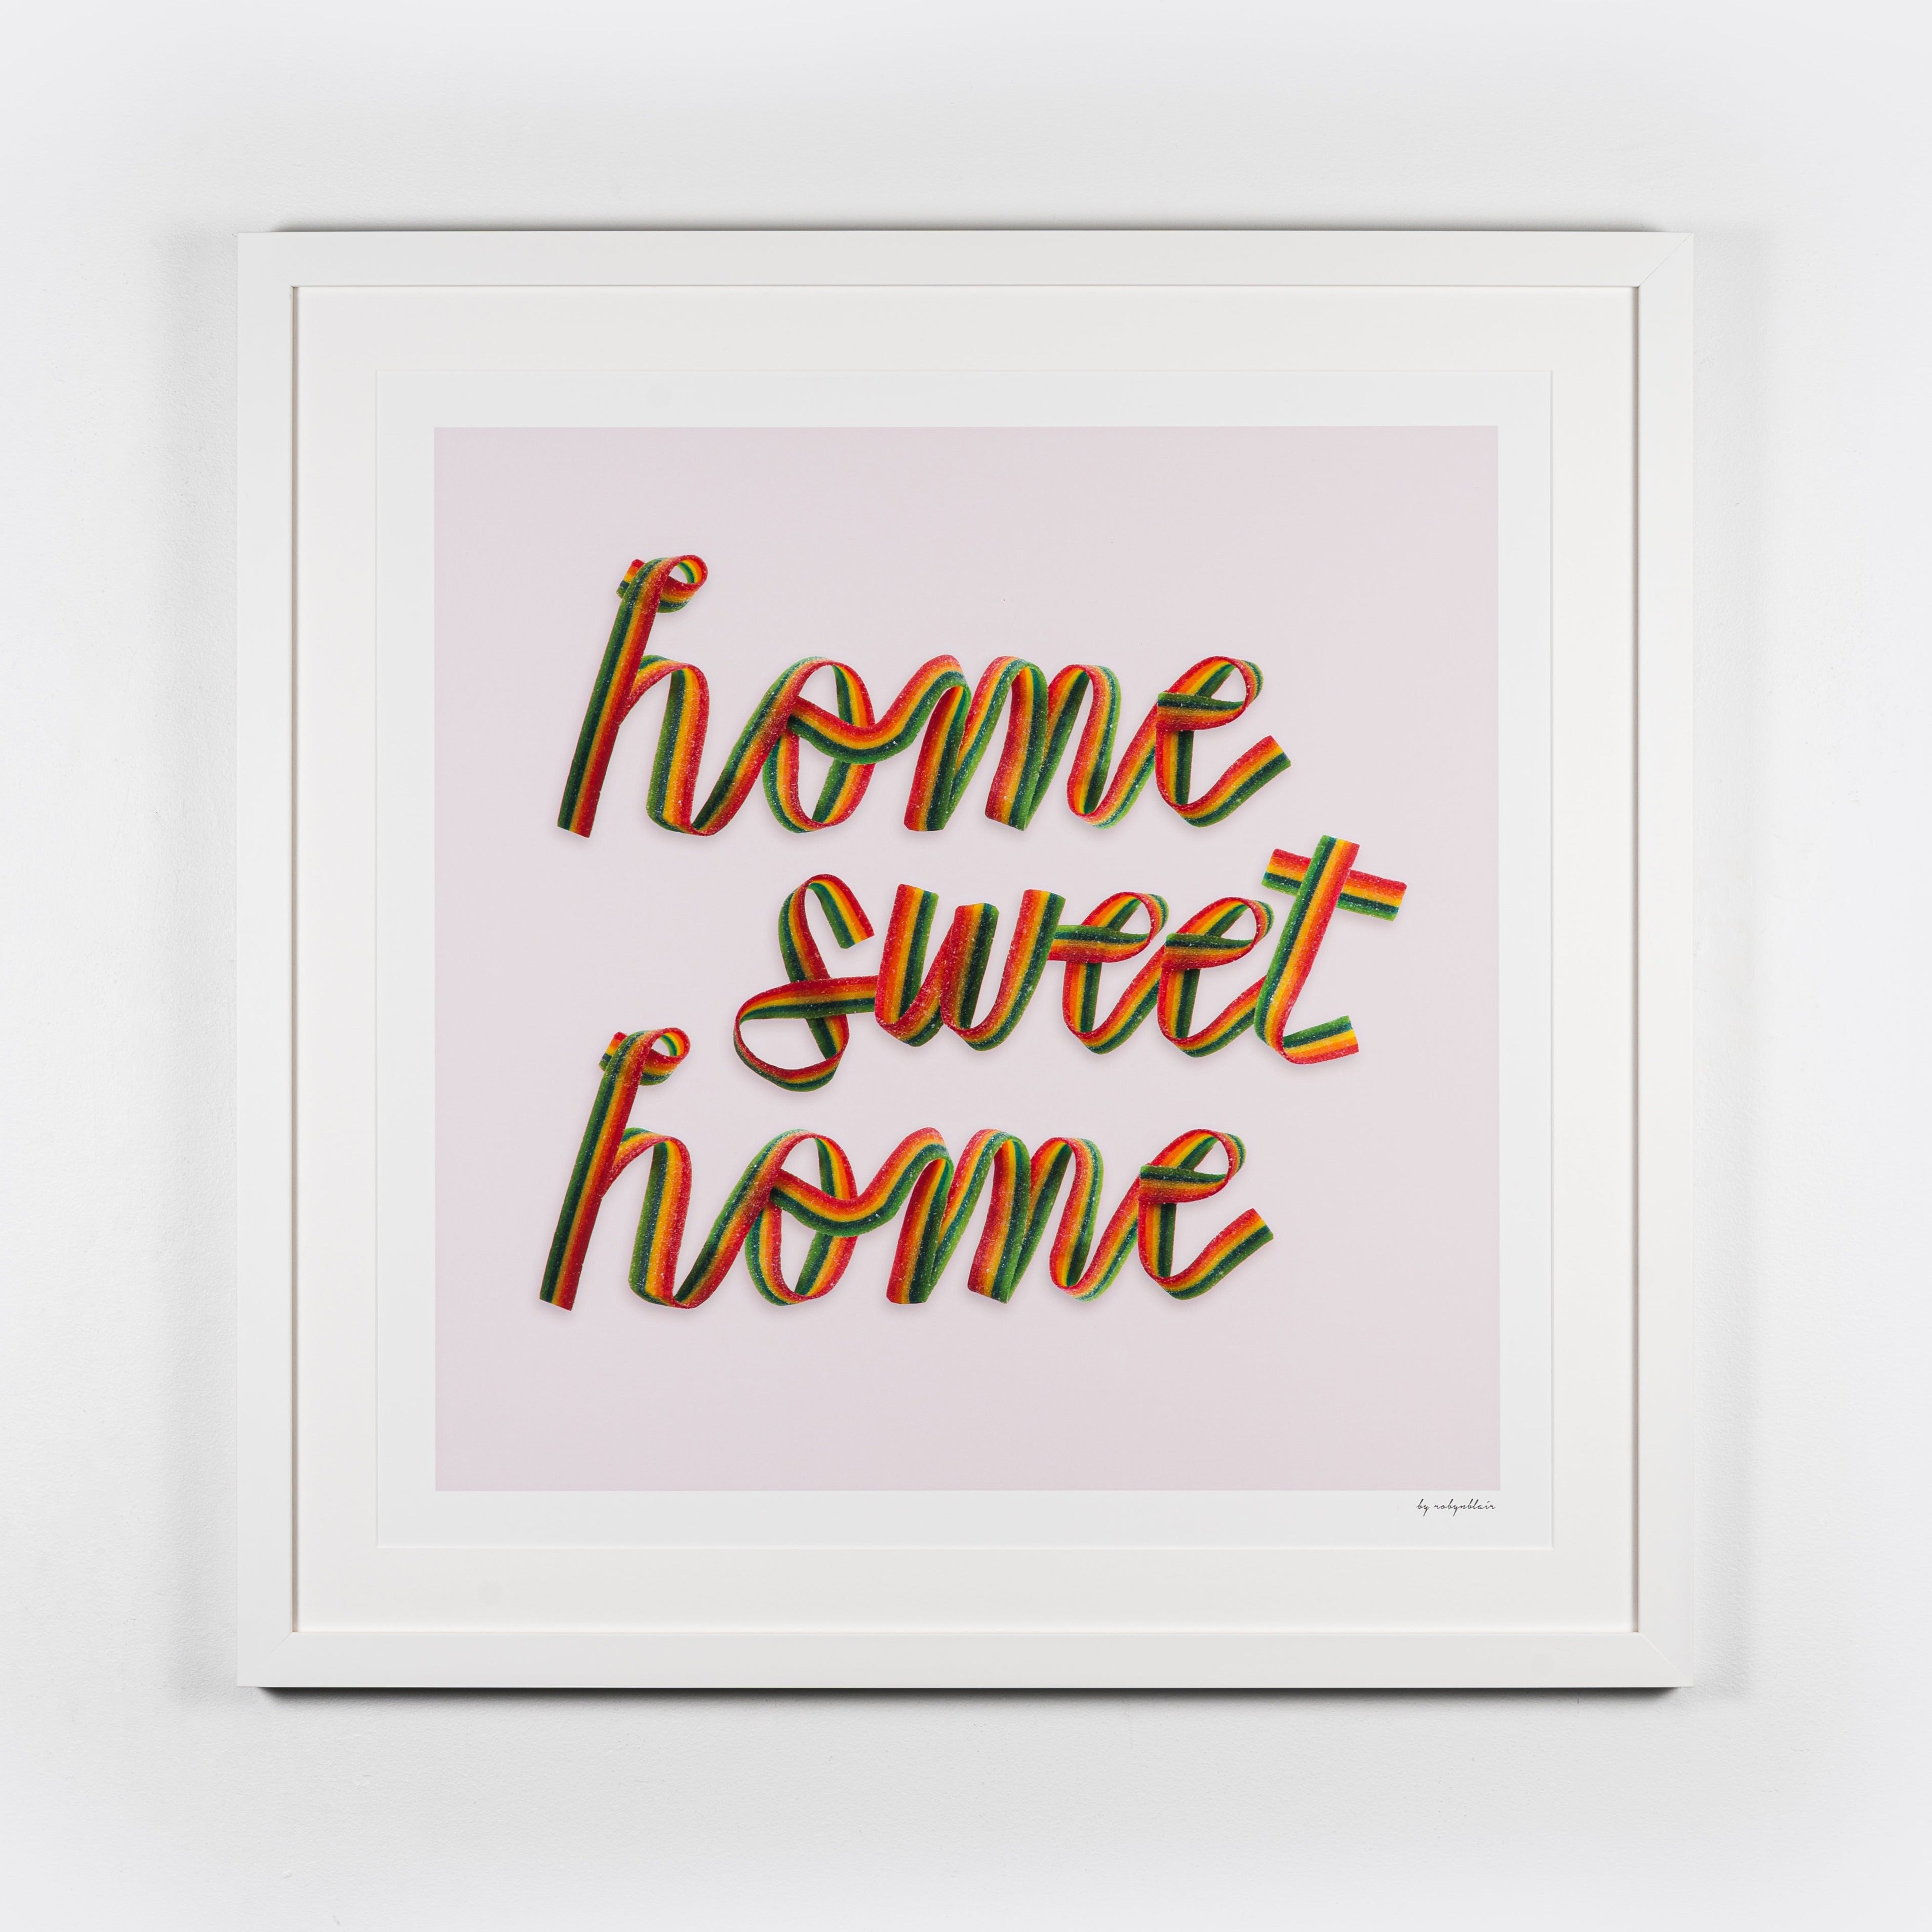 Home Sweet Home Pink